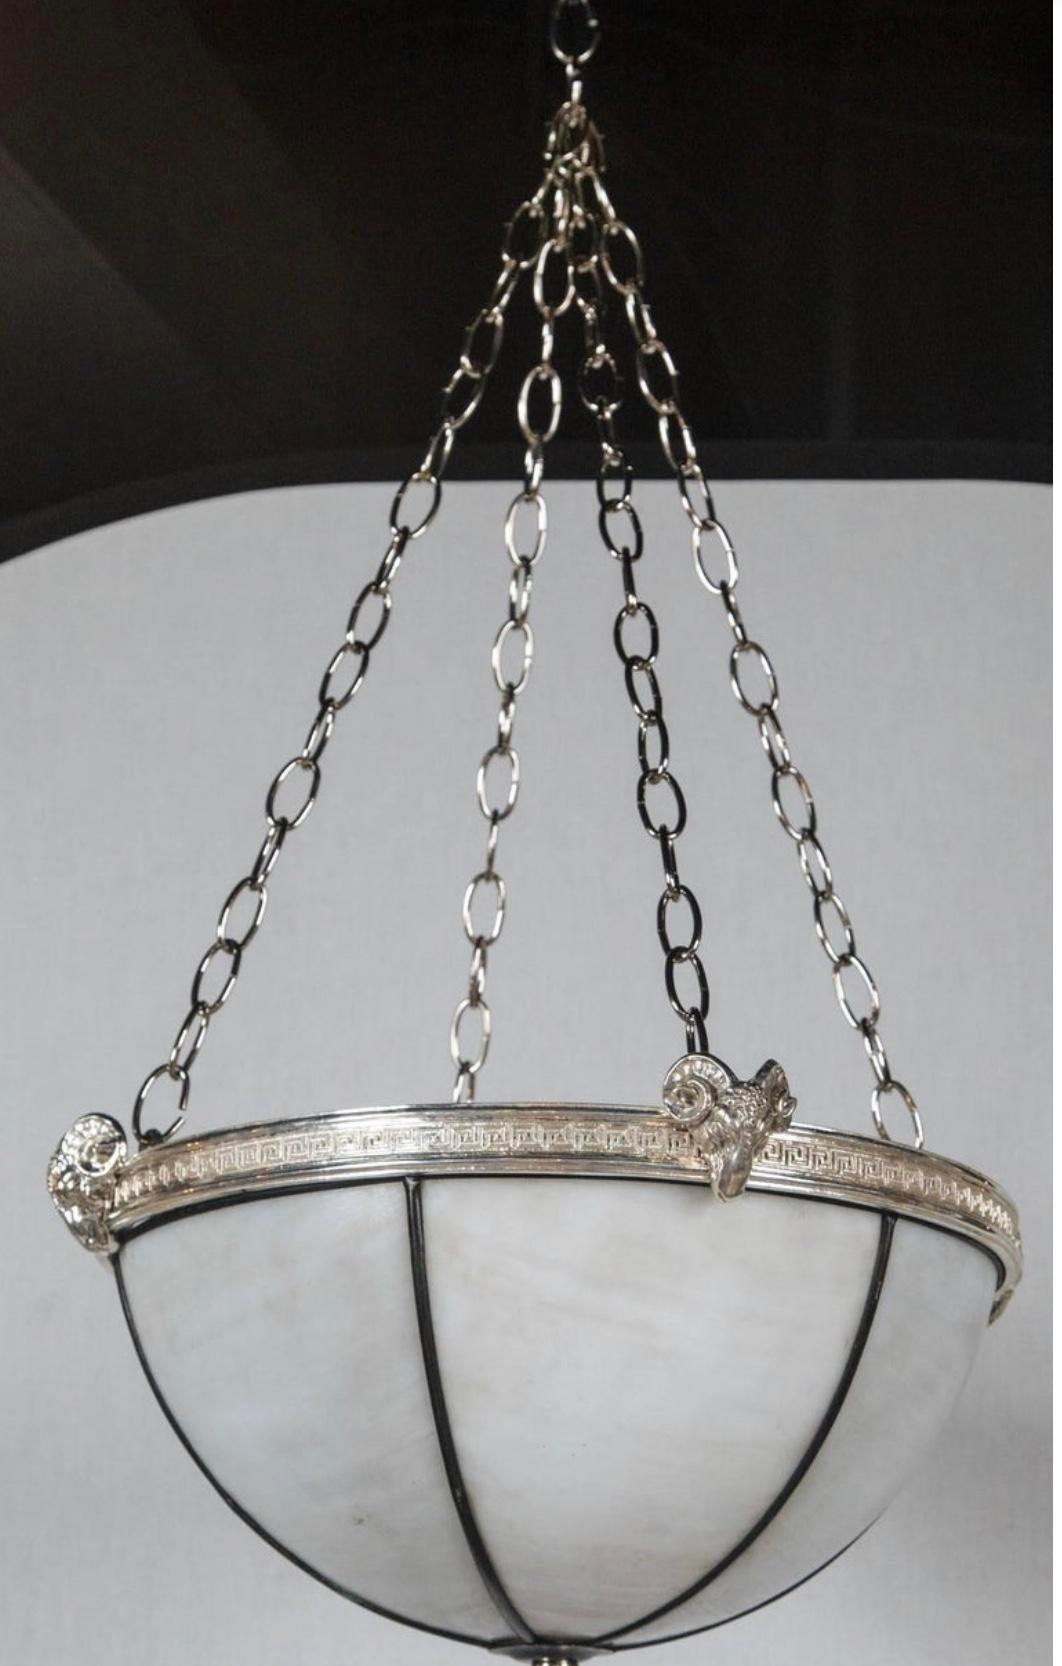 A leaded glass light fixture with interior lights, silver plated Greek key design and ram's head, circa 1920s. In very good vintage condition.

Dealer: G302YP